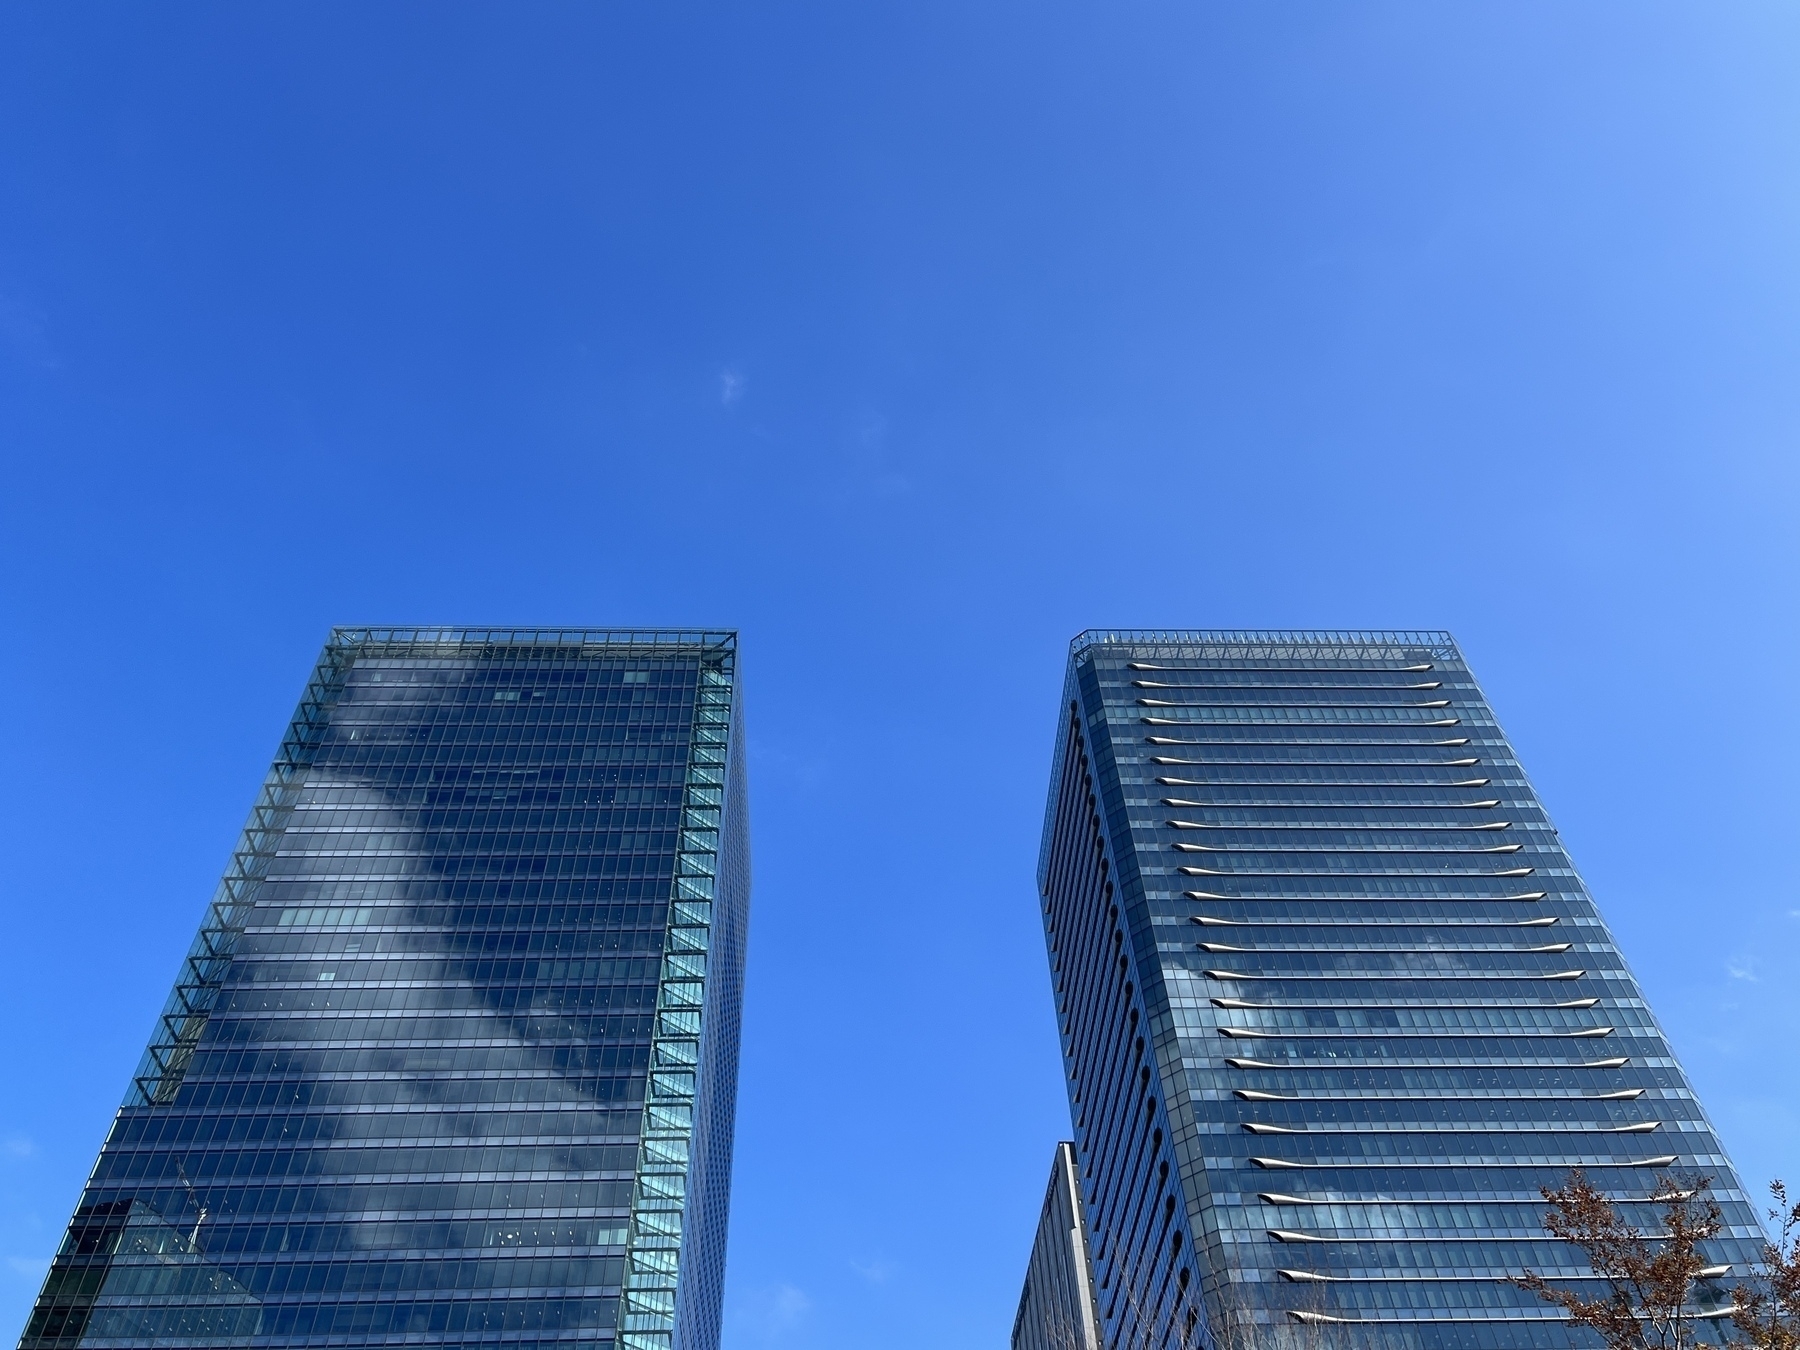 Looking up at two skyscrapers (the Osaka Front Buildings) and a blue sky